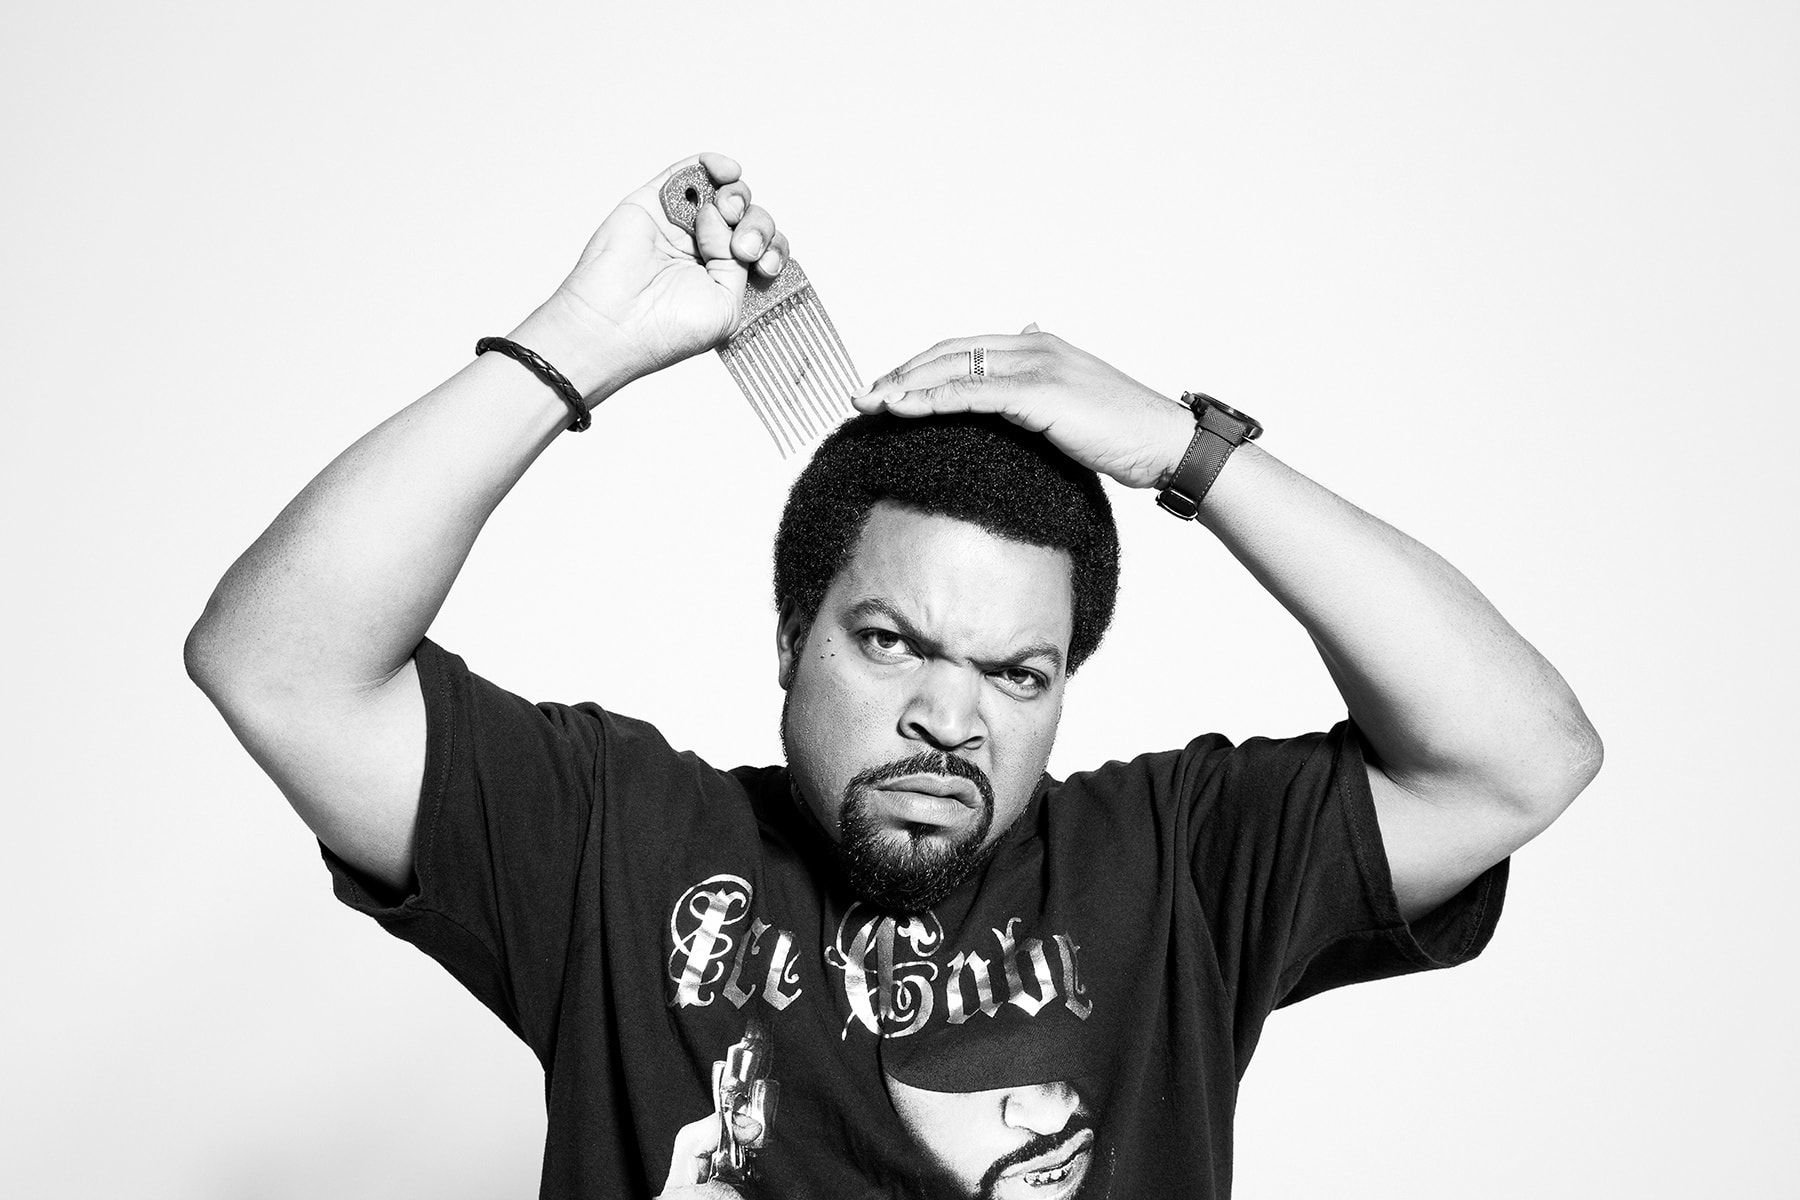 Details 63+ ice cube wallpapers best - in.cdgdbentre